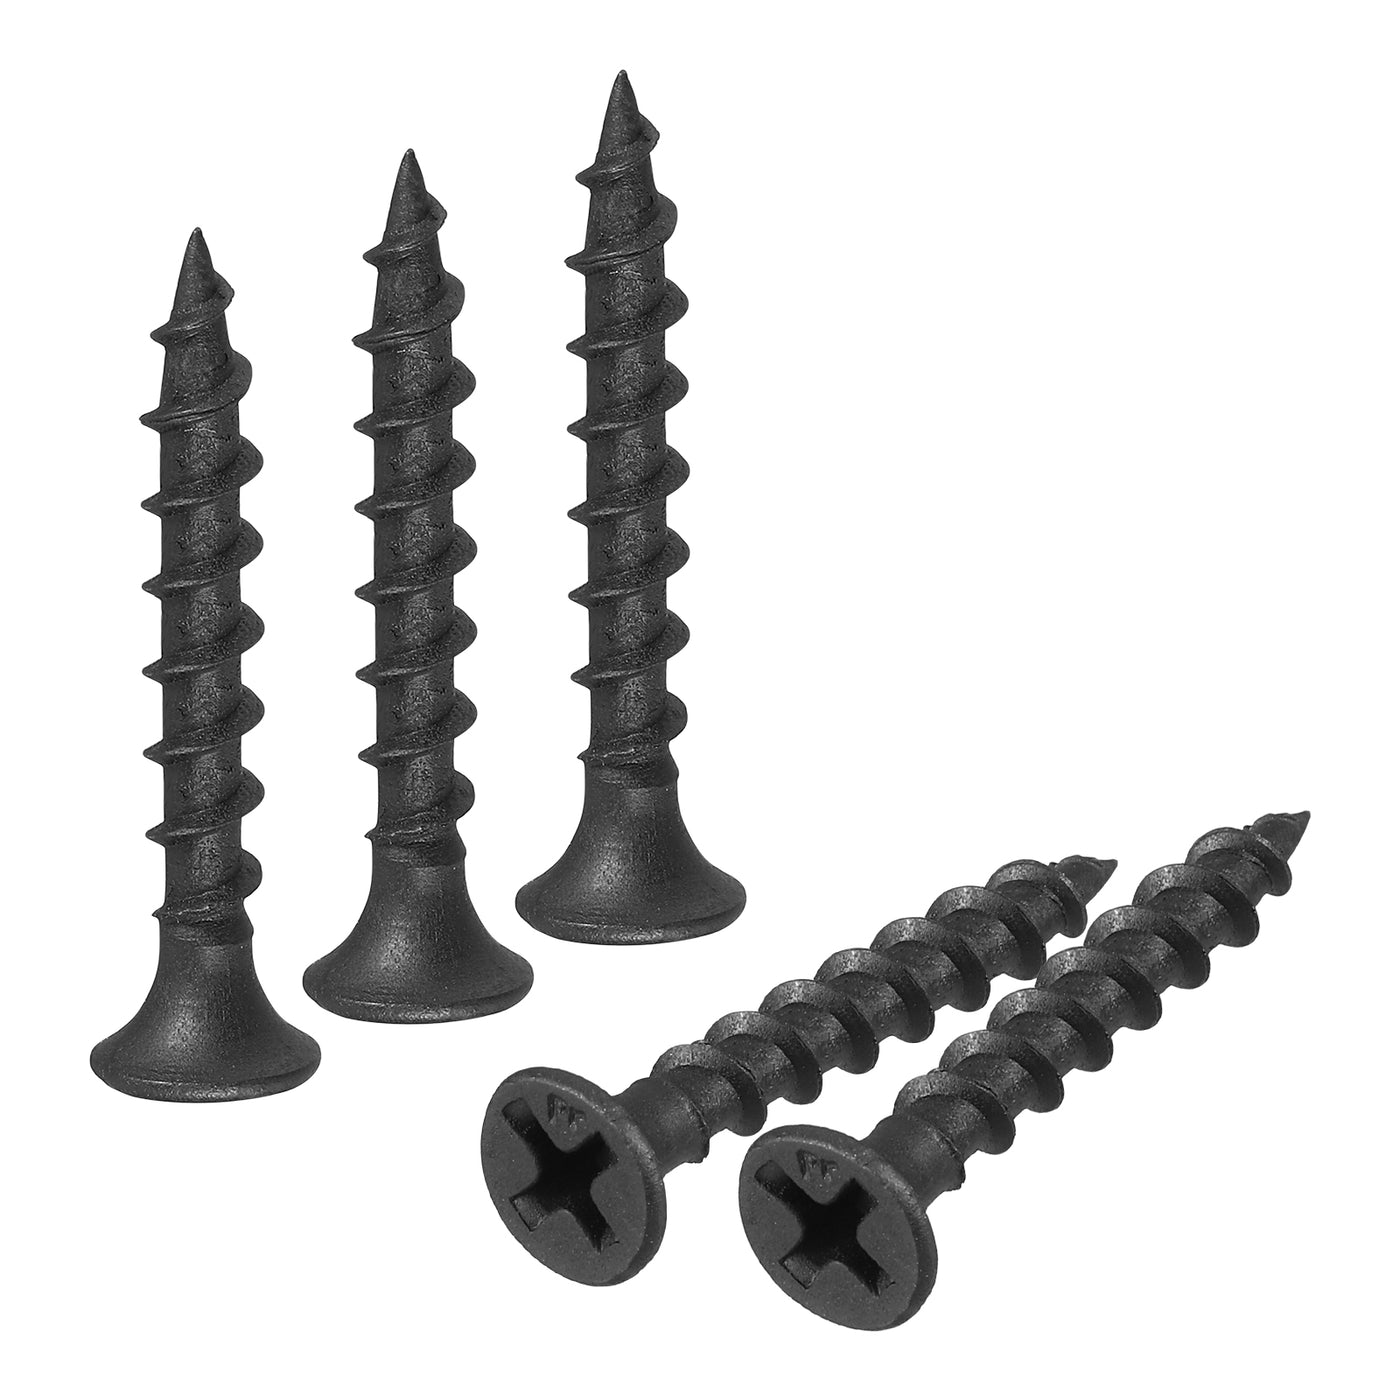 uxcell Uxcell M3.8x30mm 200pcs Phillips Drive Wood Screws, Carbon Steel Self Tapping Screws